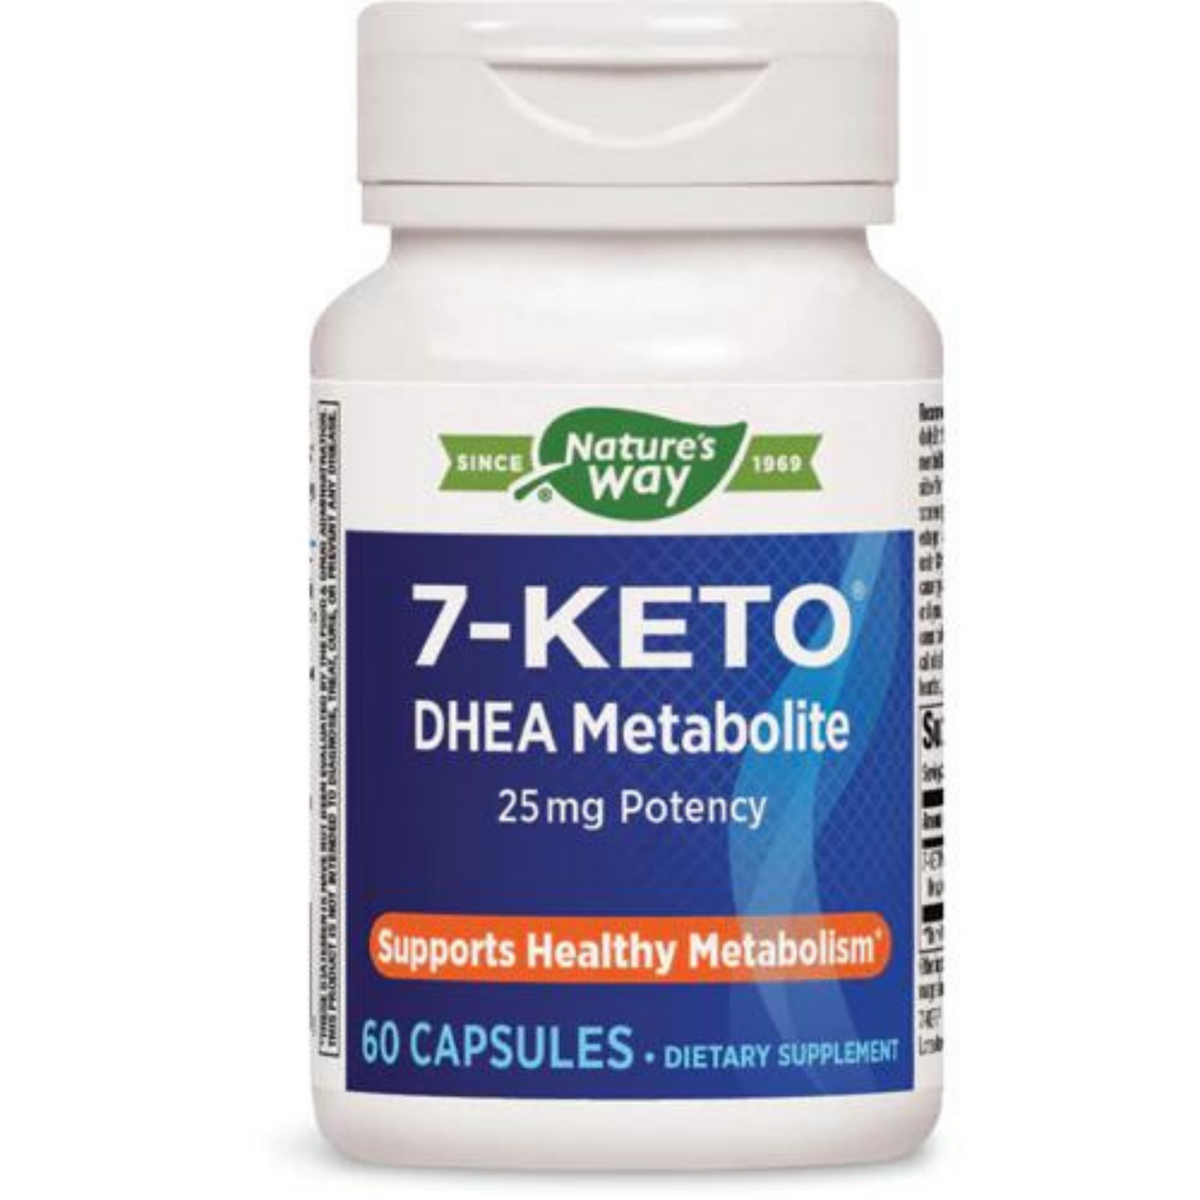 Primary image of 7-Keto DHEA